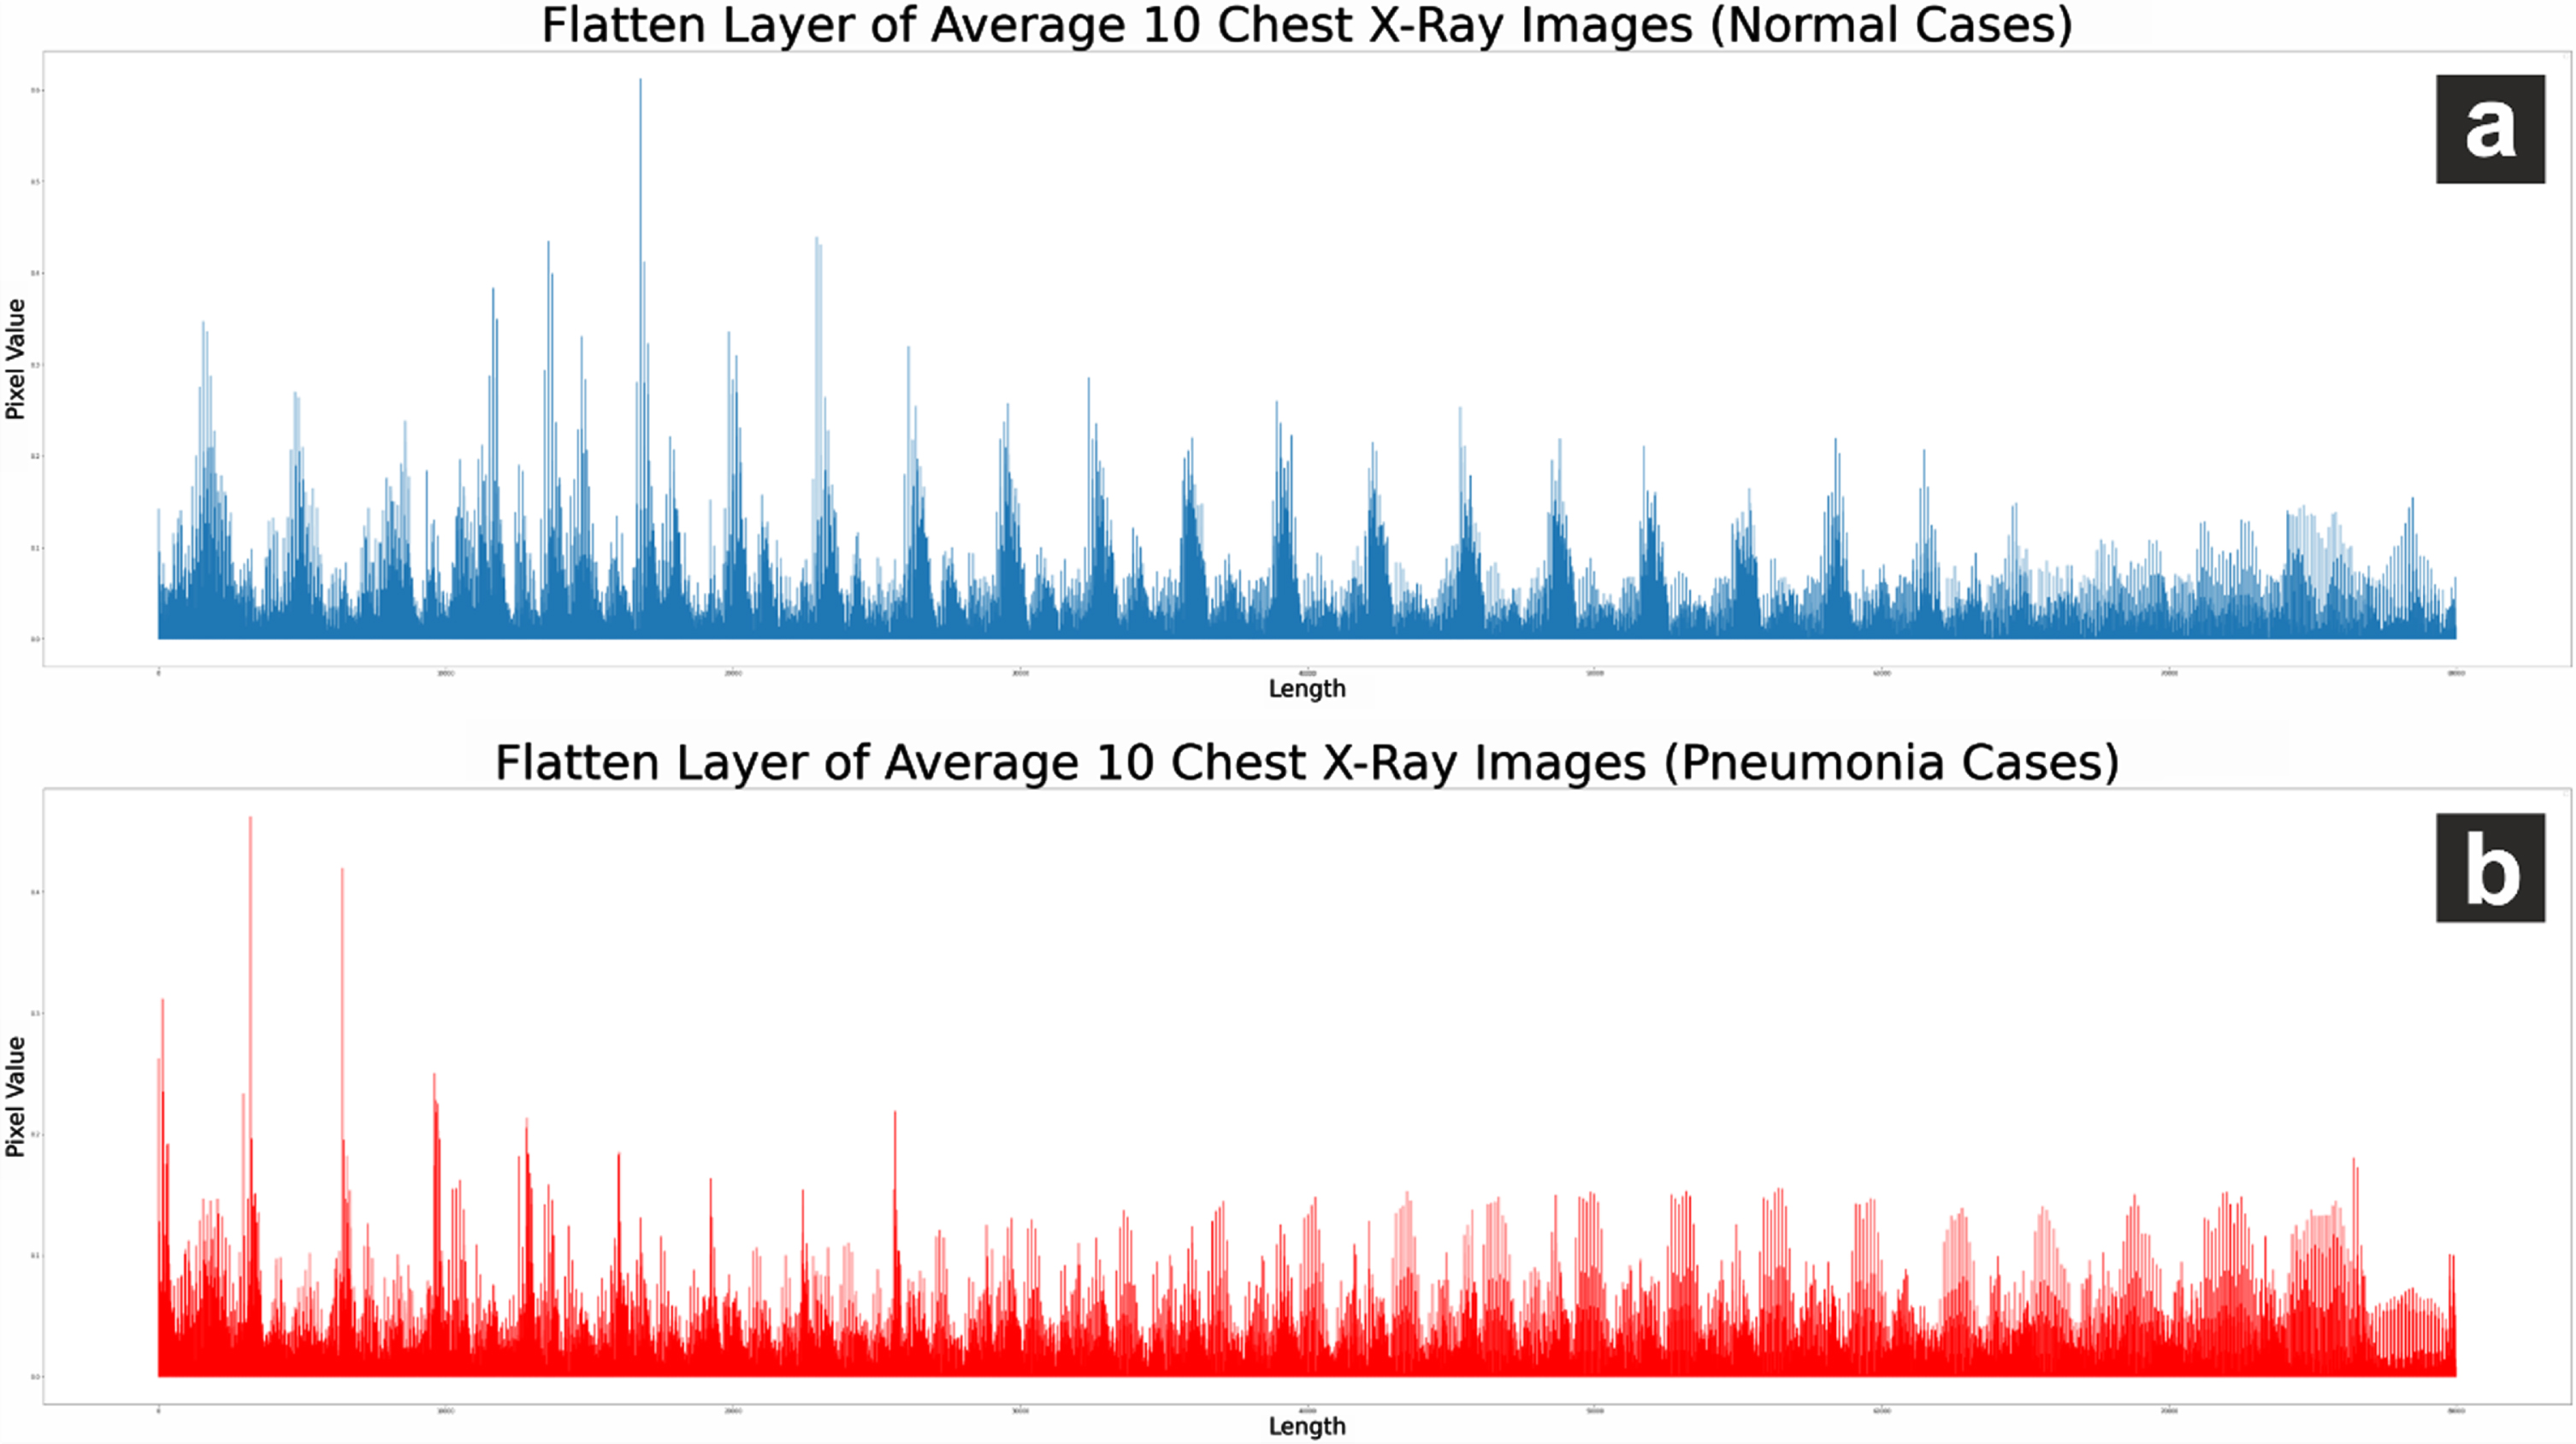 (a) Average of 10 Normal chest X-rays dan (b) average of 10 Pneumonia chest X-rays.